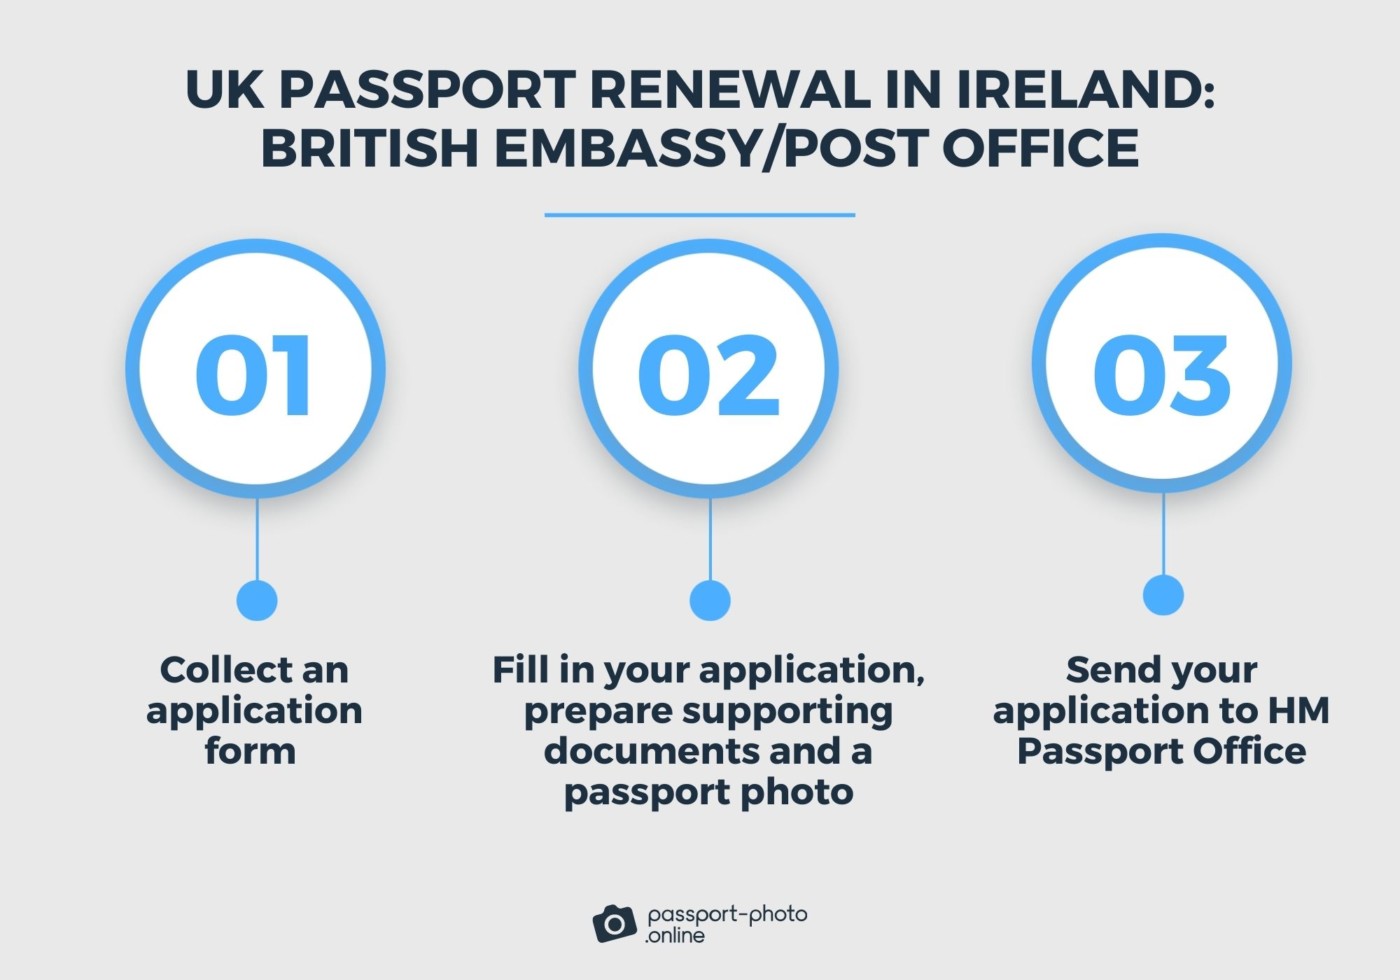 steps on renewing UK passport in Ireland by paper forms